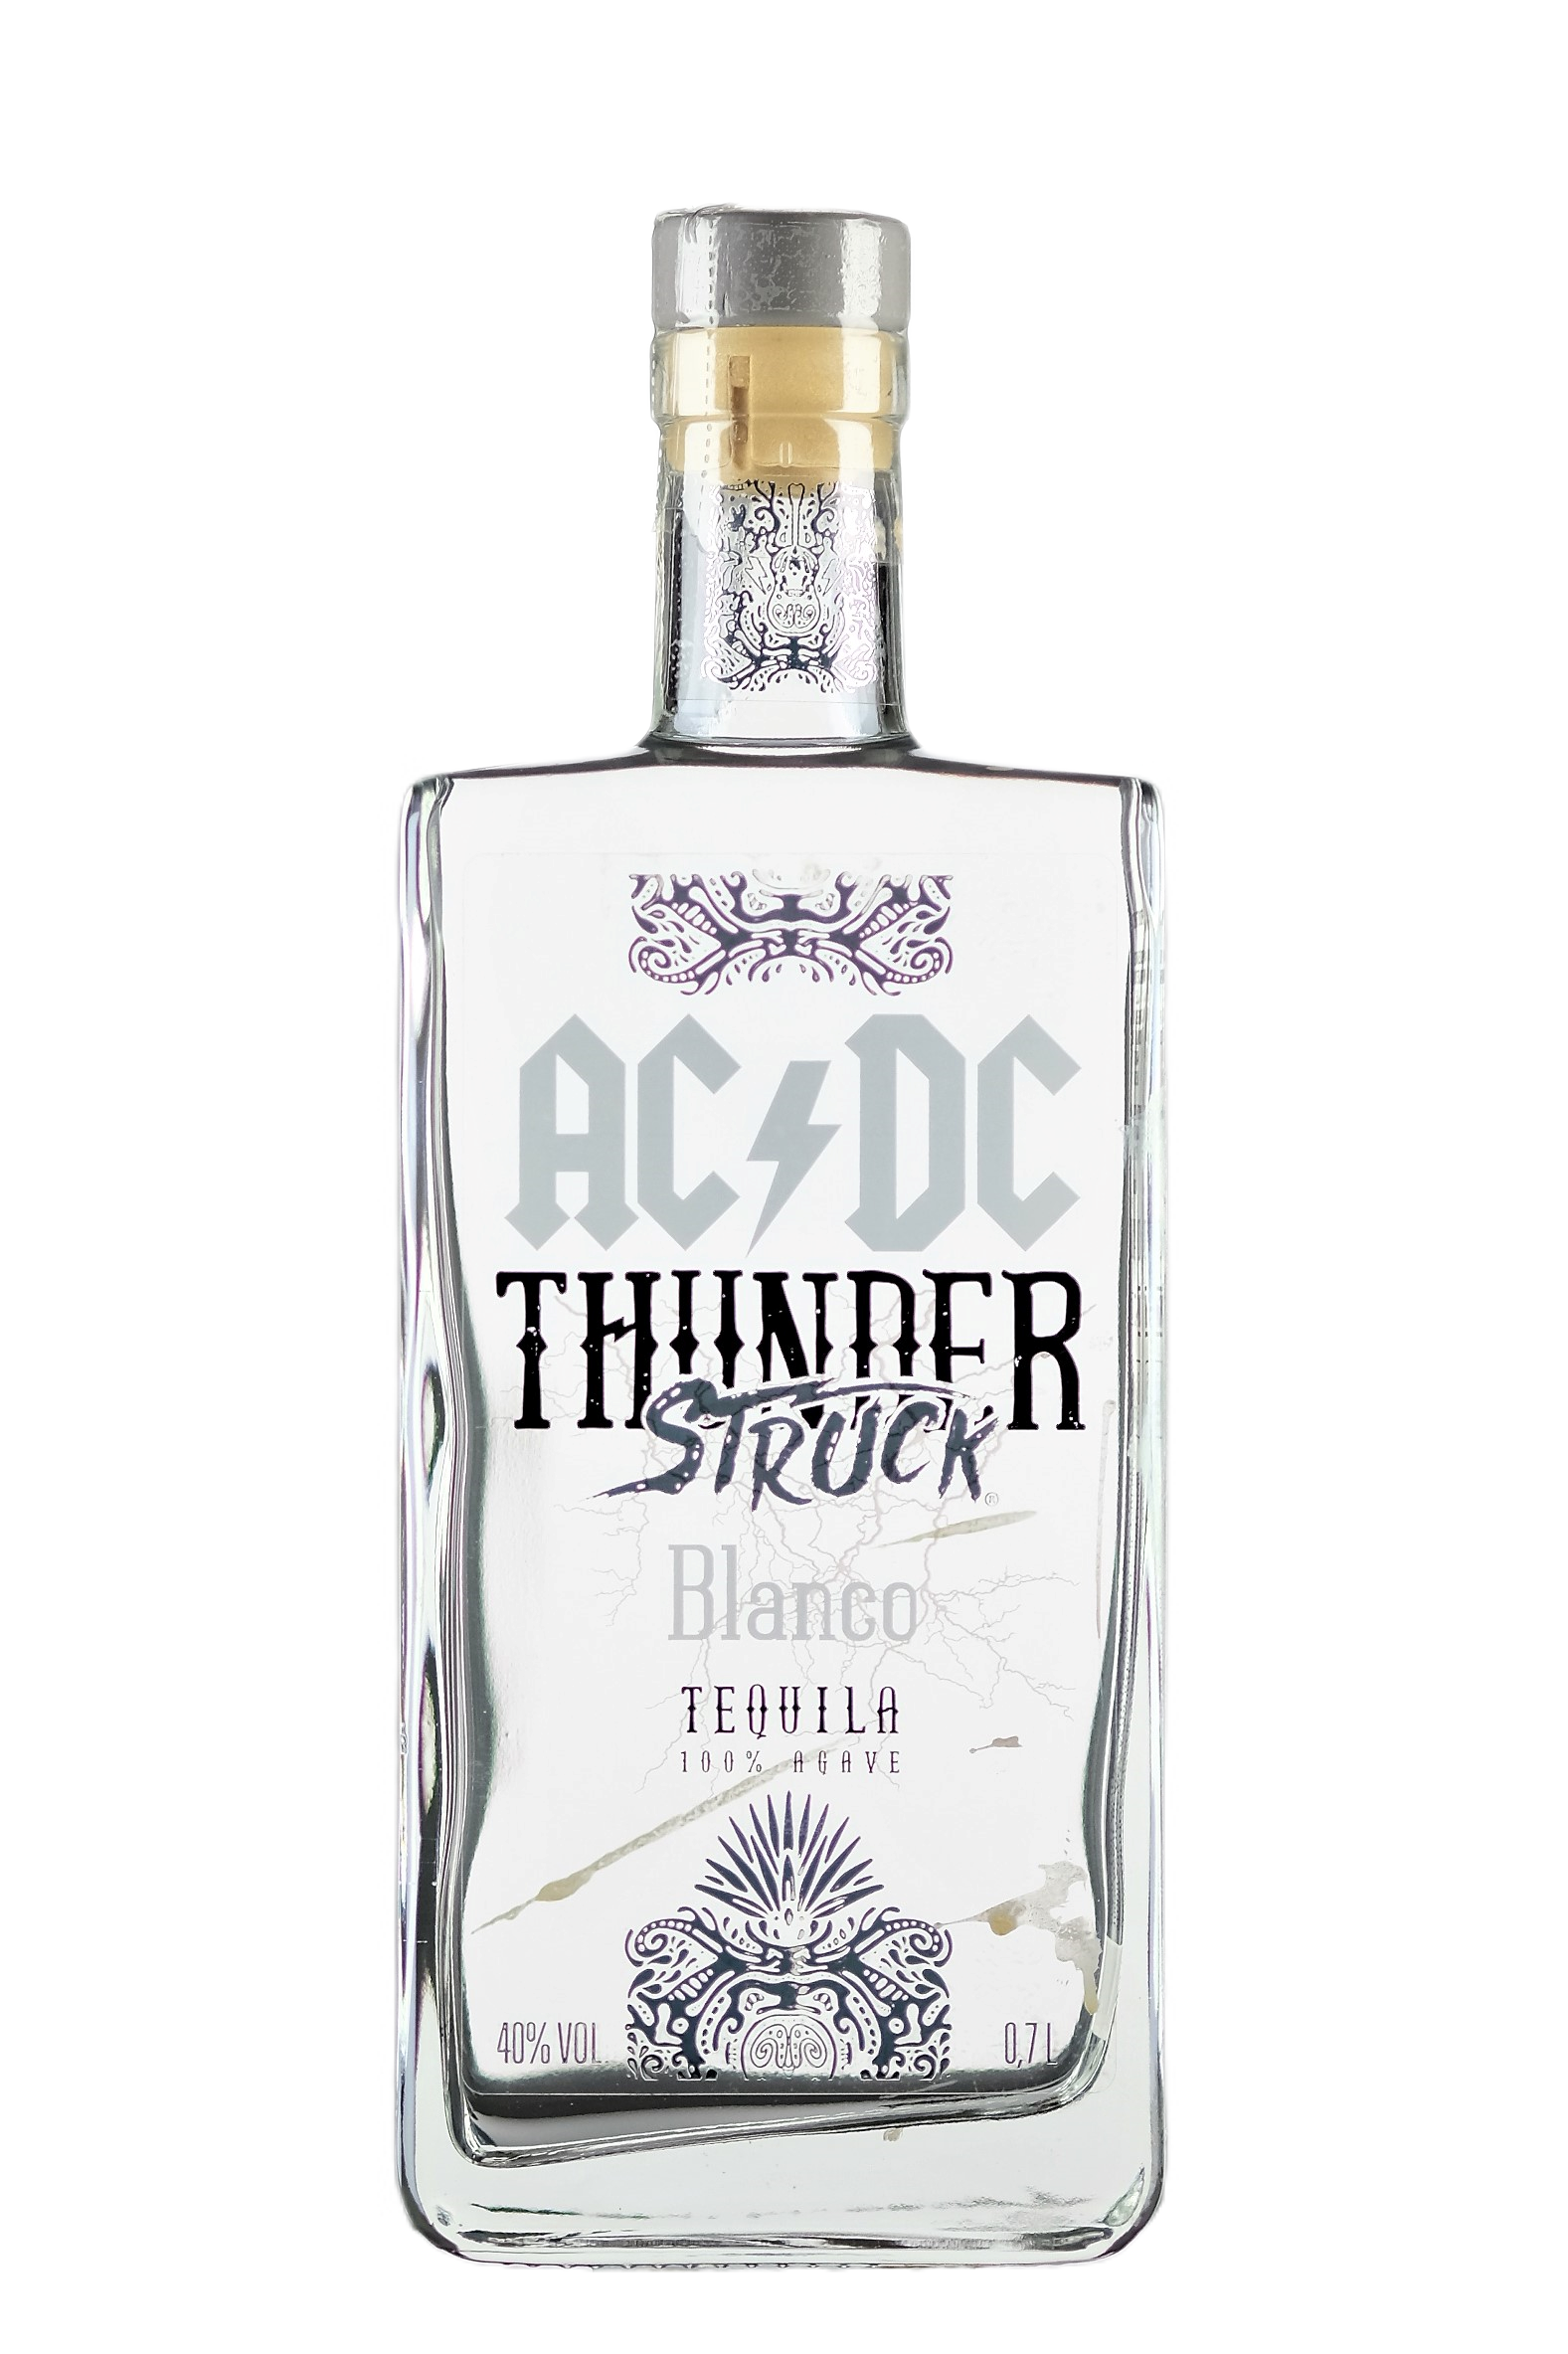 matron Veluddannet Marco Polo AC/DC Thunderstruck Blanco Tequila 700ml – Purvis Cellars